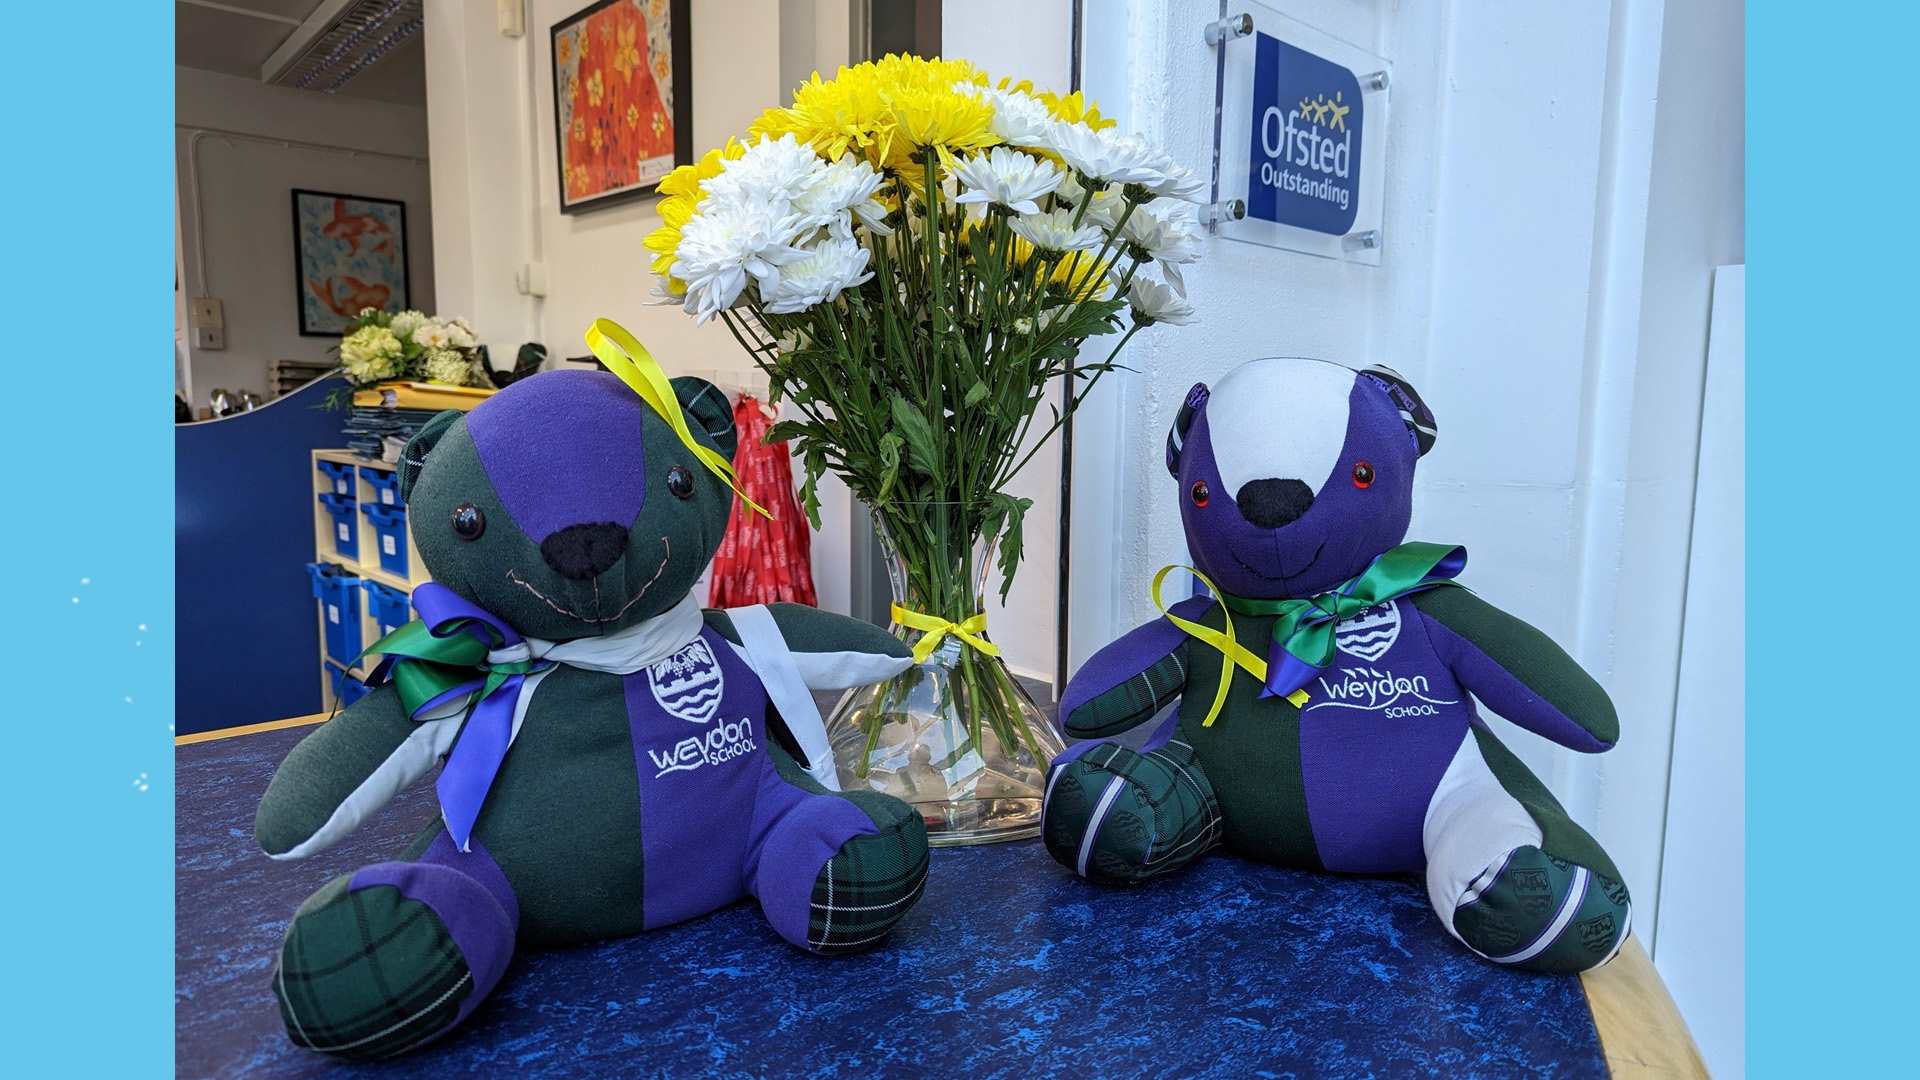 Two blue and green teddy bears on a table, with a vase of yellow and white flowers between them.